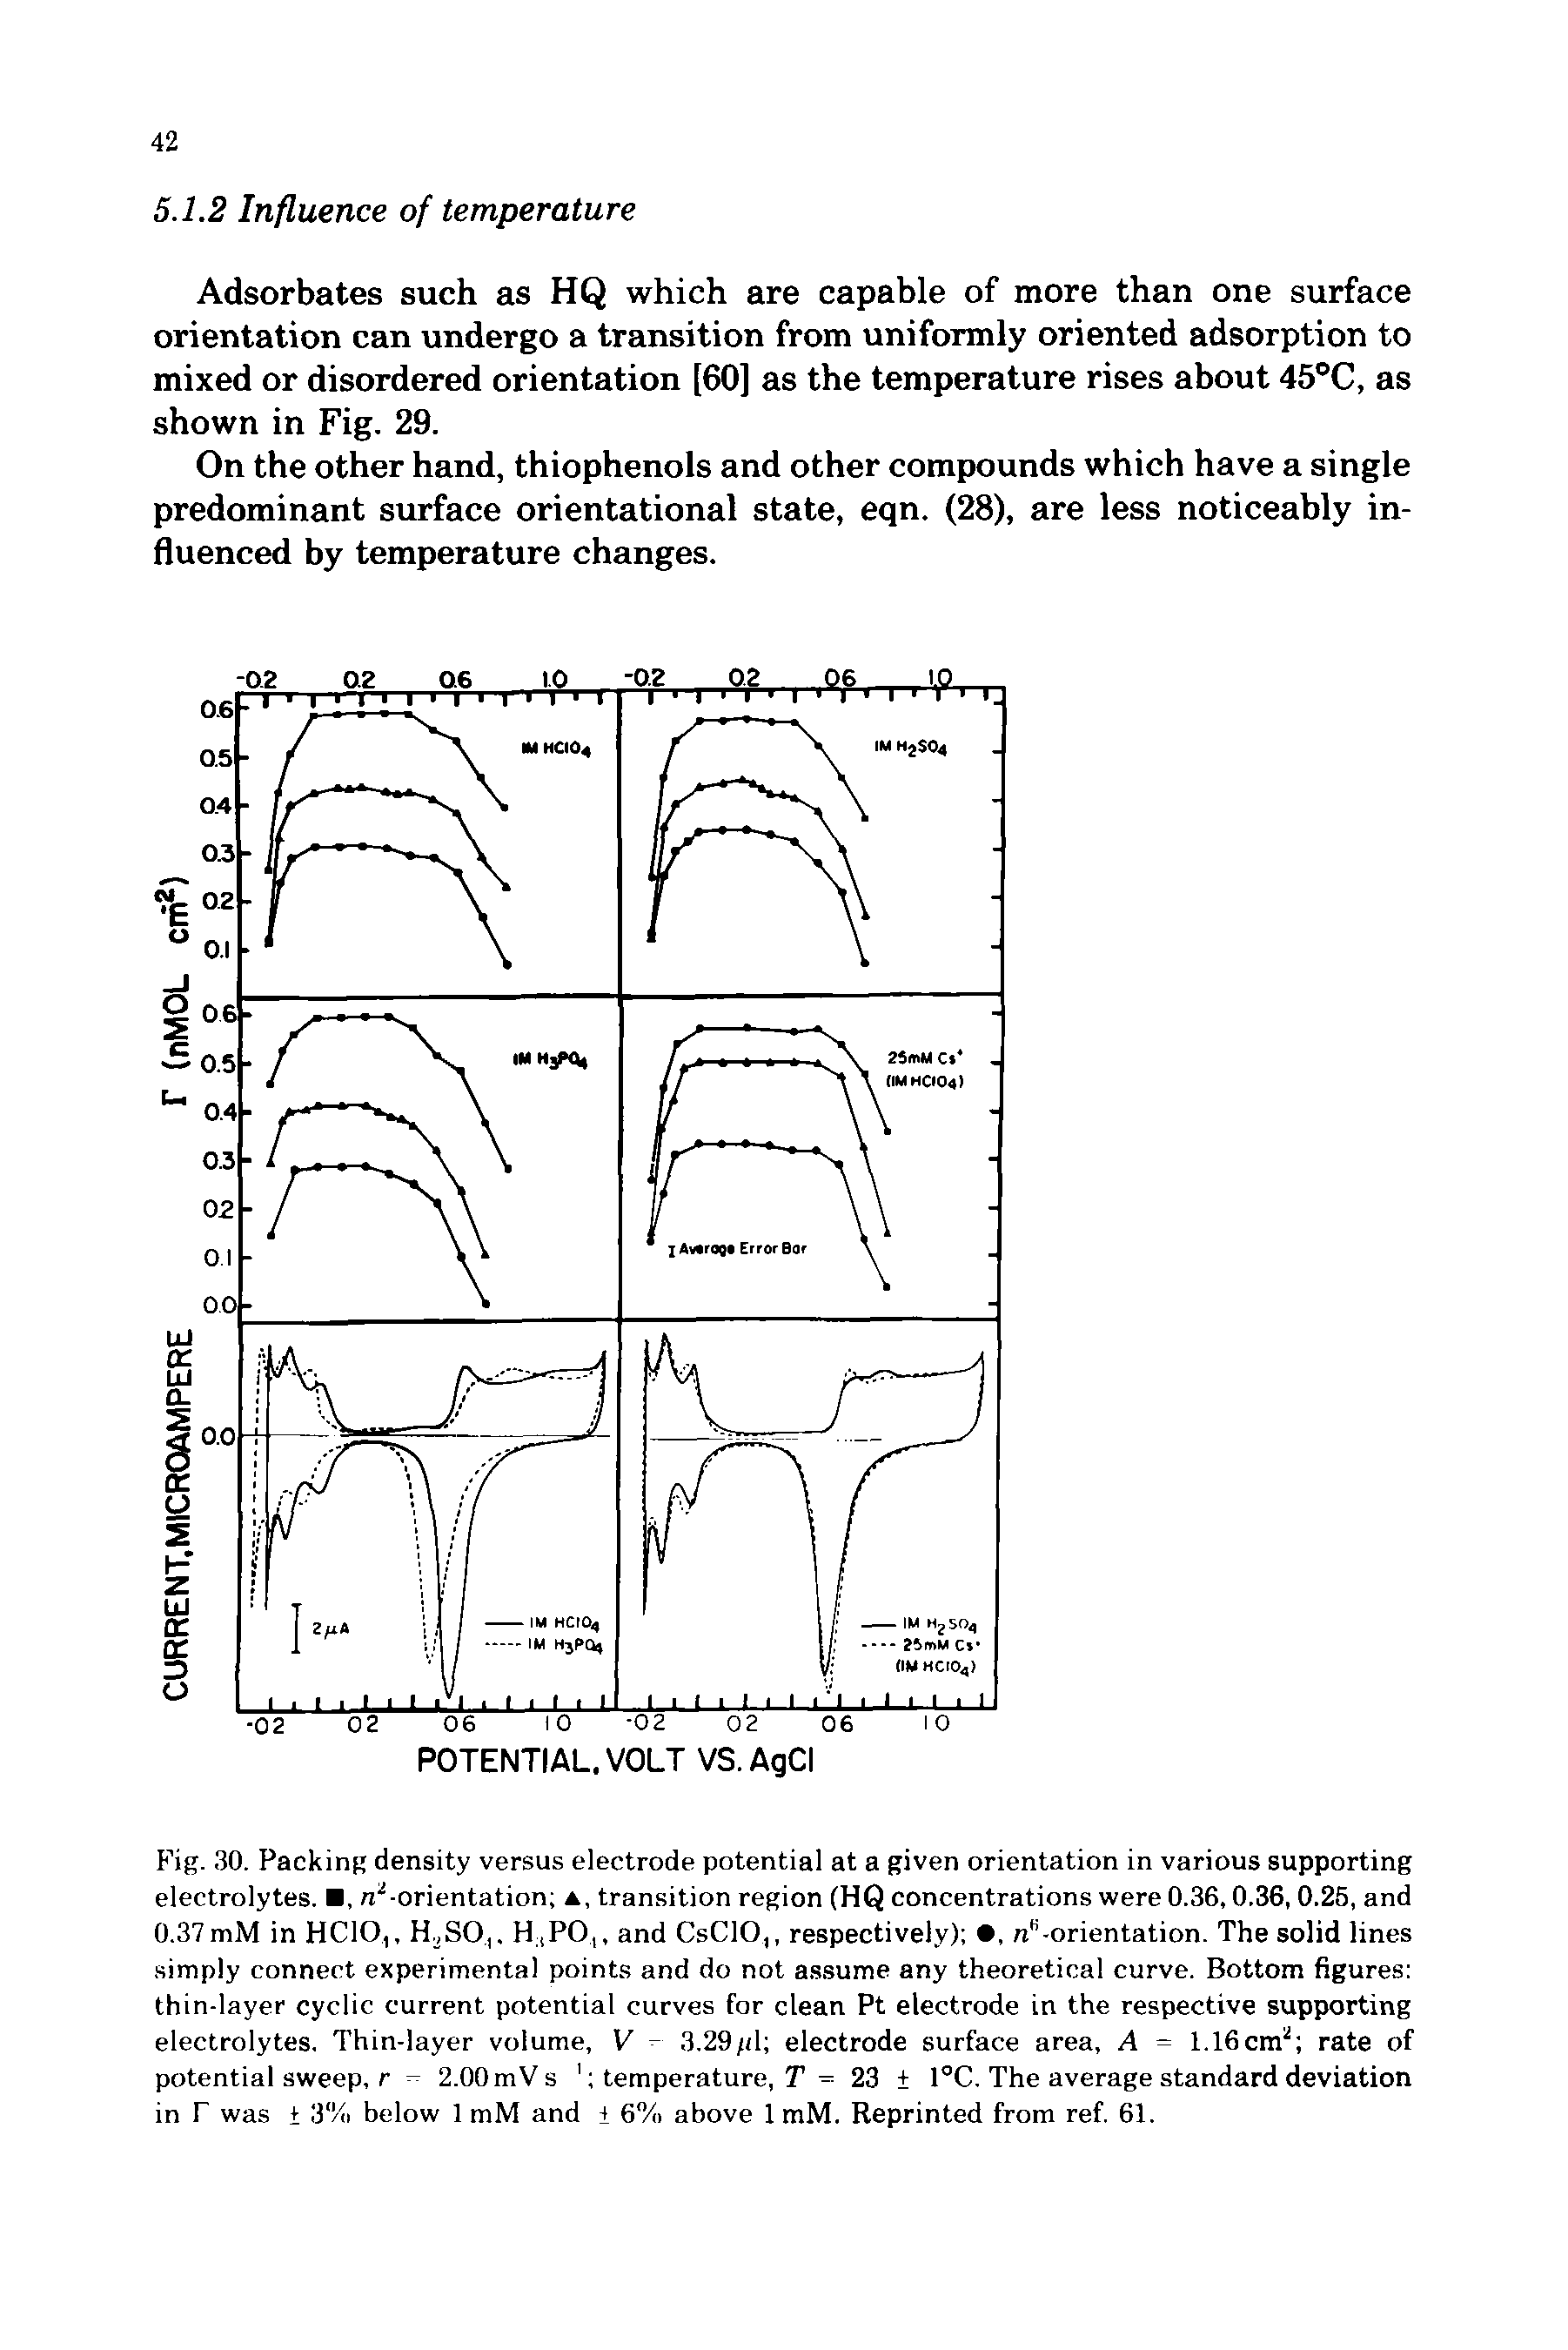 Fig. 30. Packing density versus electrode potential at a given orientation in various supporting electrolytes. , n2-orientation , transition region (HQ concentrations were 0.36,0.36, 0.25, and 0.37 mM in HCIO, H2SO., H 1PO, and CsCIO, respectively) , nK-orientation. The solid lines simply connect experimental points and do not assume any theoretical curve. Bottom figures thin-layer cyclic current potential curves for clean Pt electrode in the respective supporting electrolytes. Thin-layer volume, V 3.29/il electrode surface area, A = 1.16cm2 rate of potential sweep, r = 2.00 mV s 1 temperature, T = 23 t 1°C. The average standard deviation in T was 1 3% below 1 mM and l 6% above 1 mM. Reprinted from ref. 61.